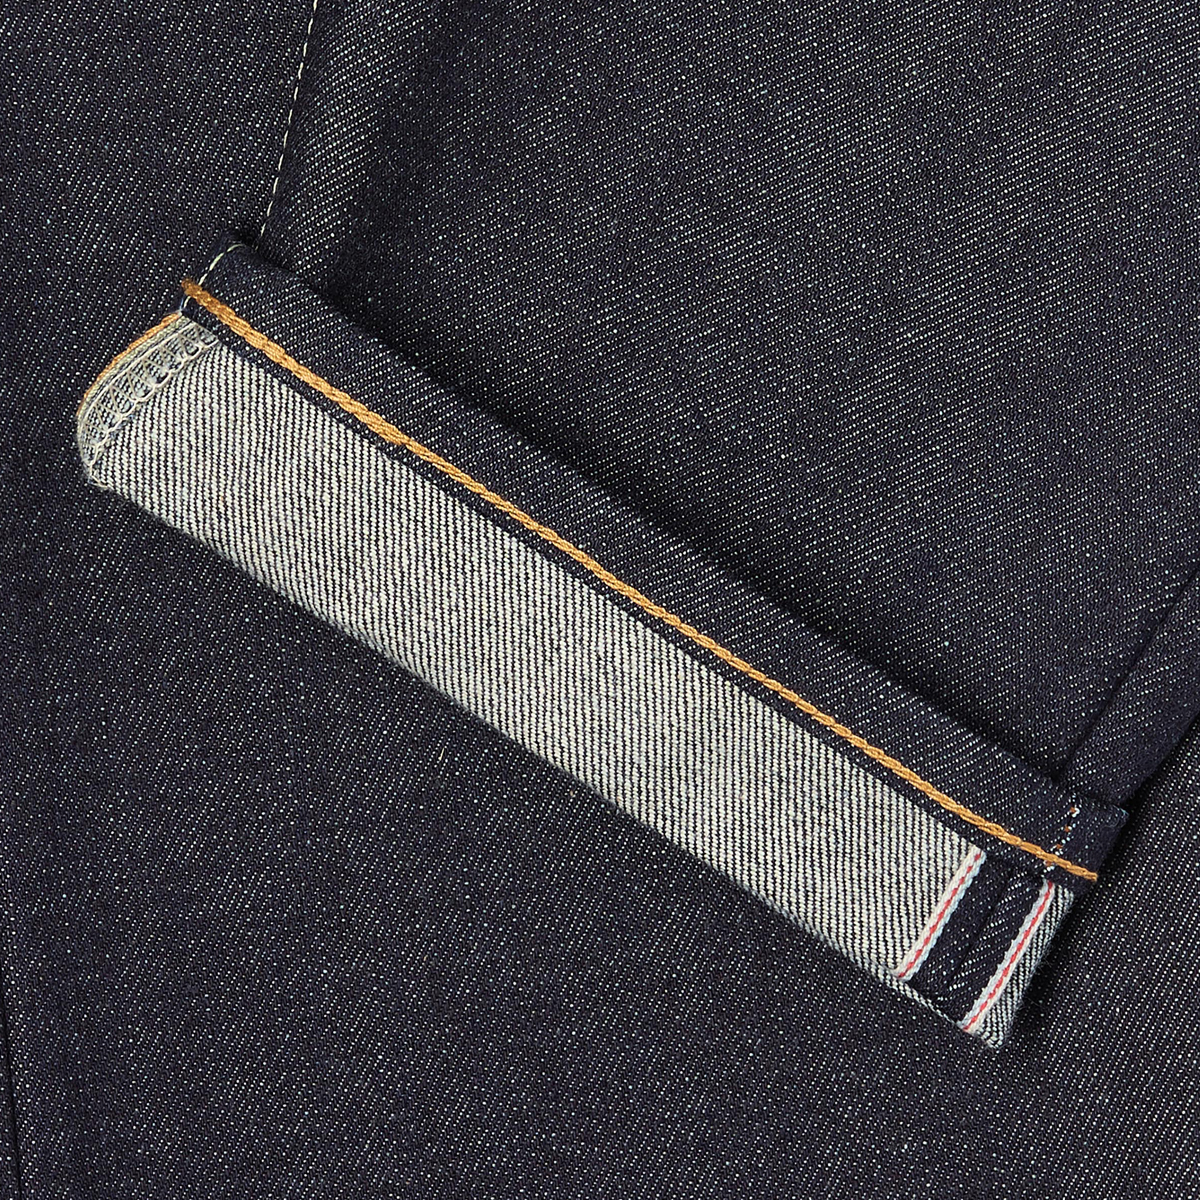 Regular Tapered - Made In Japan - Kurabo Recycle Red Selvage Denim 14oz - Unwashed